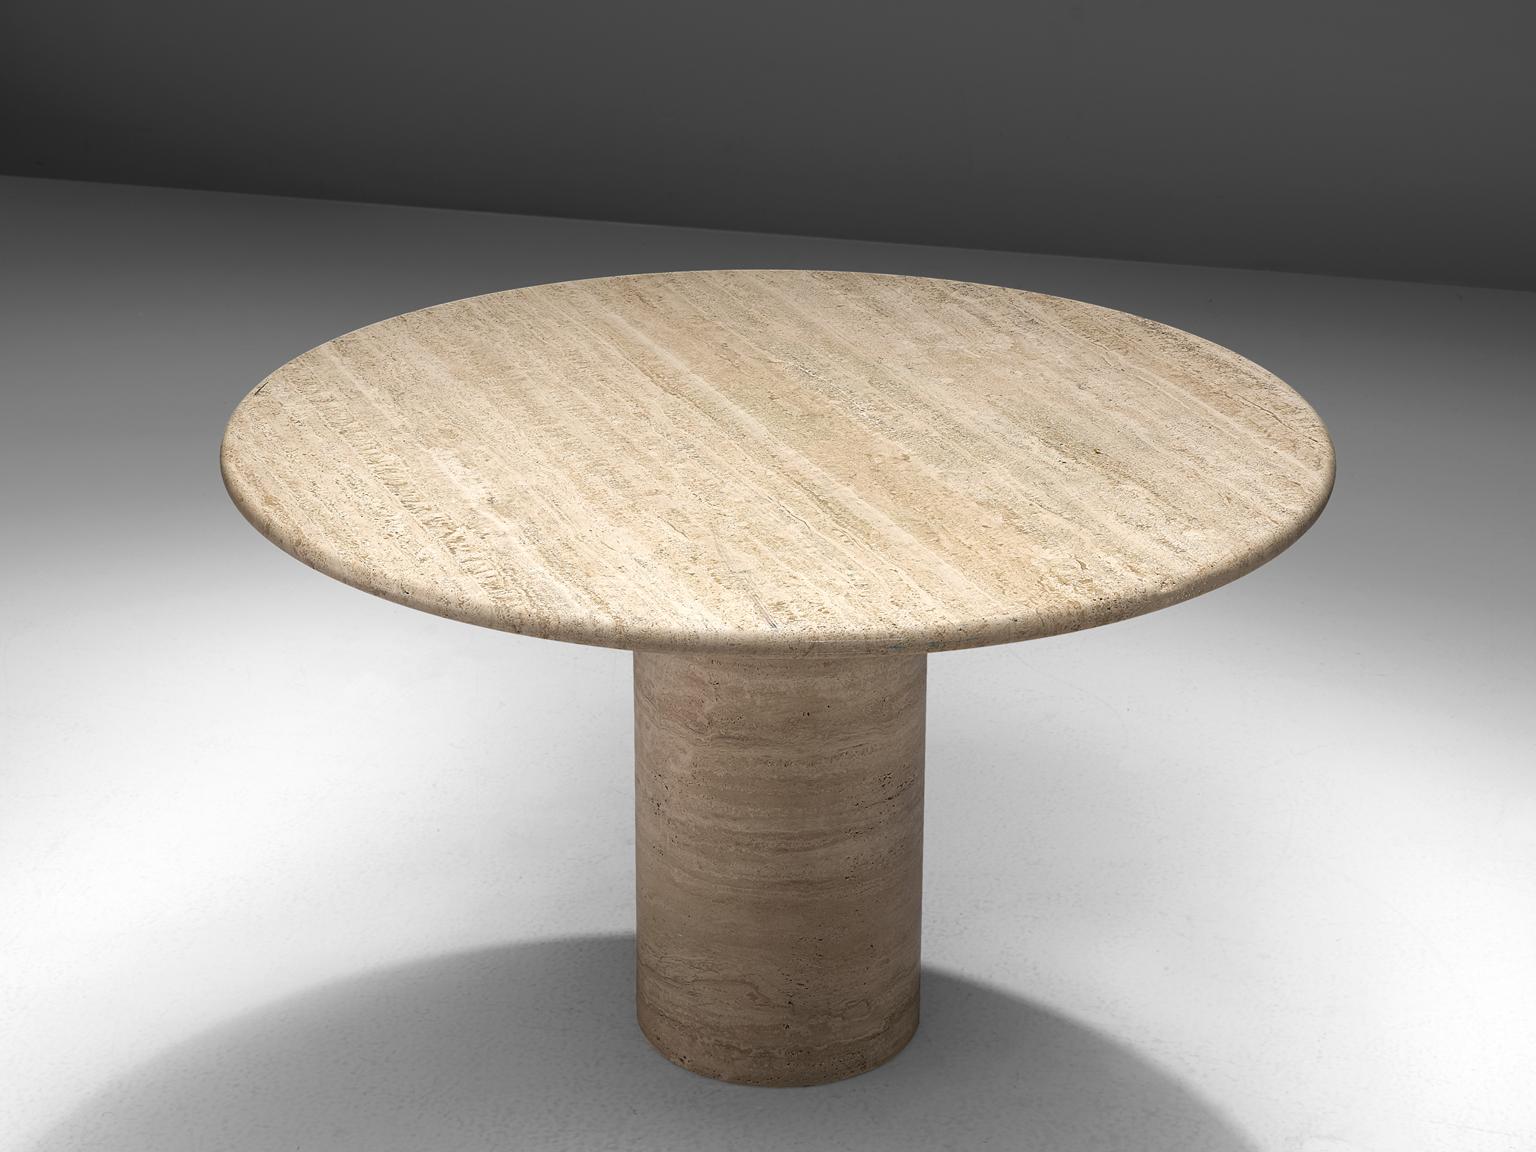 Centre table, travertine, Europe, 1970s.

This strong dining table features a massive, round foot and a thick circular travertine tabletop. The aesthetics are archetypical for postmodern design, bearing references to architectural forms and